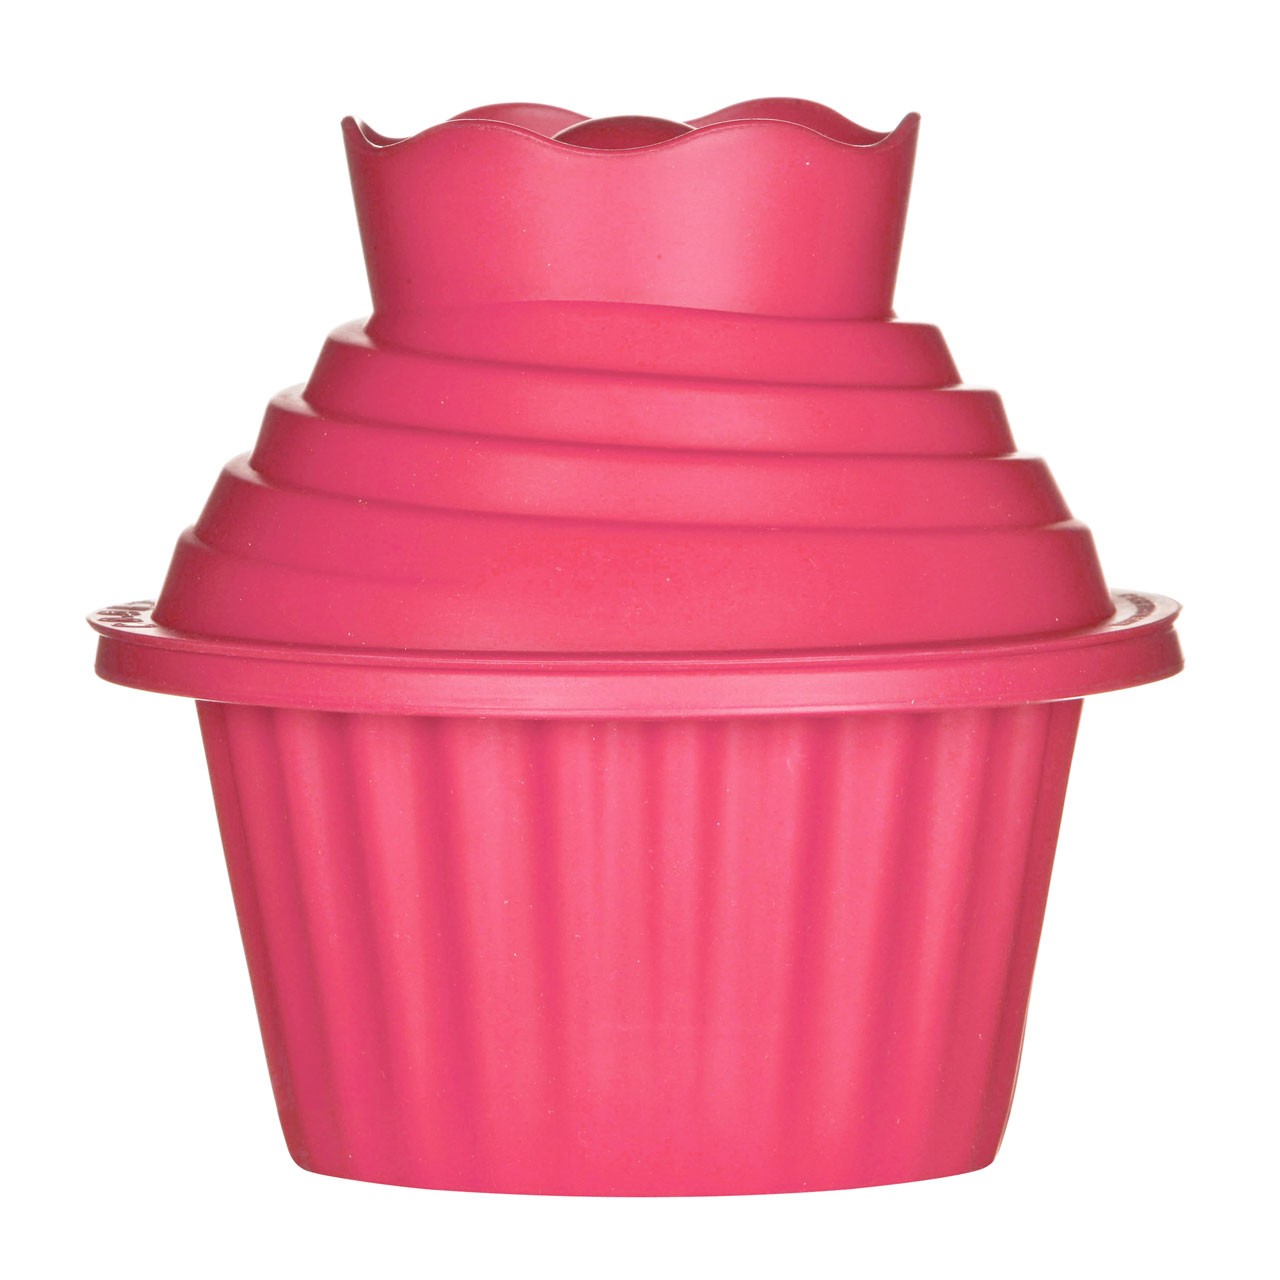 Prime Furnishing Giant Cupcake Mould, 3-Pieces - Hot Pink